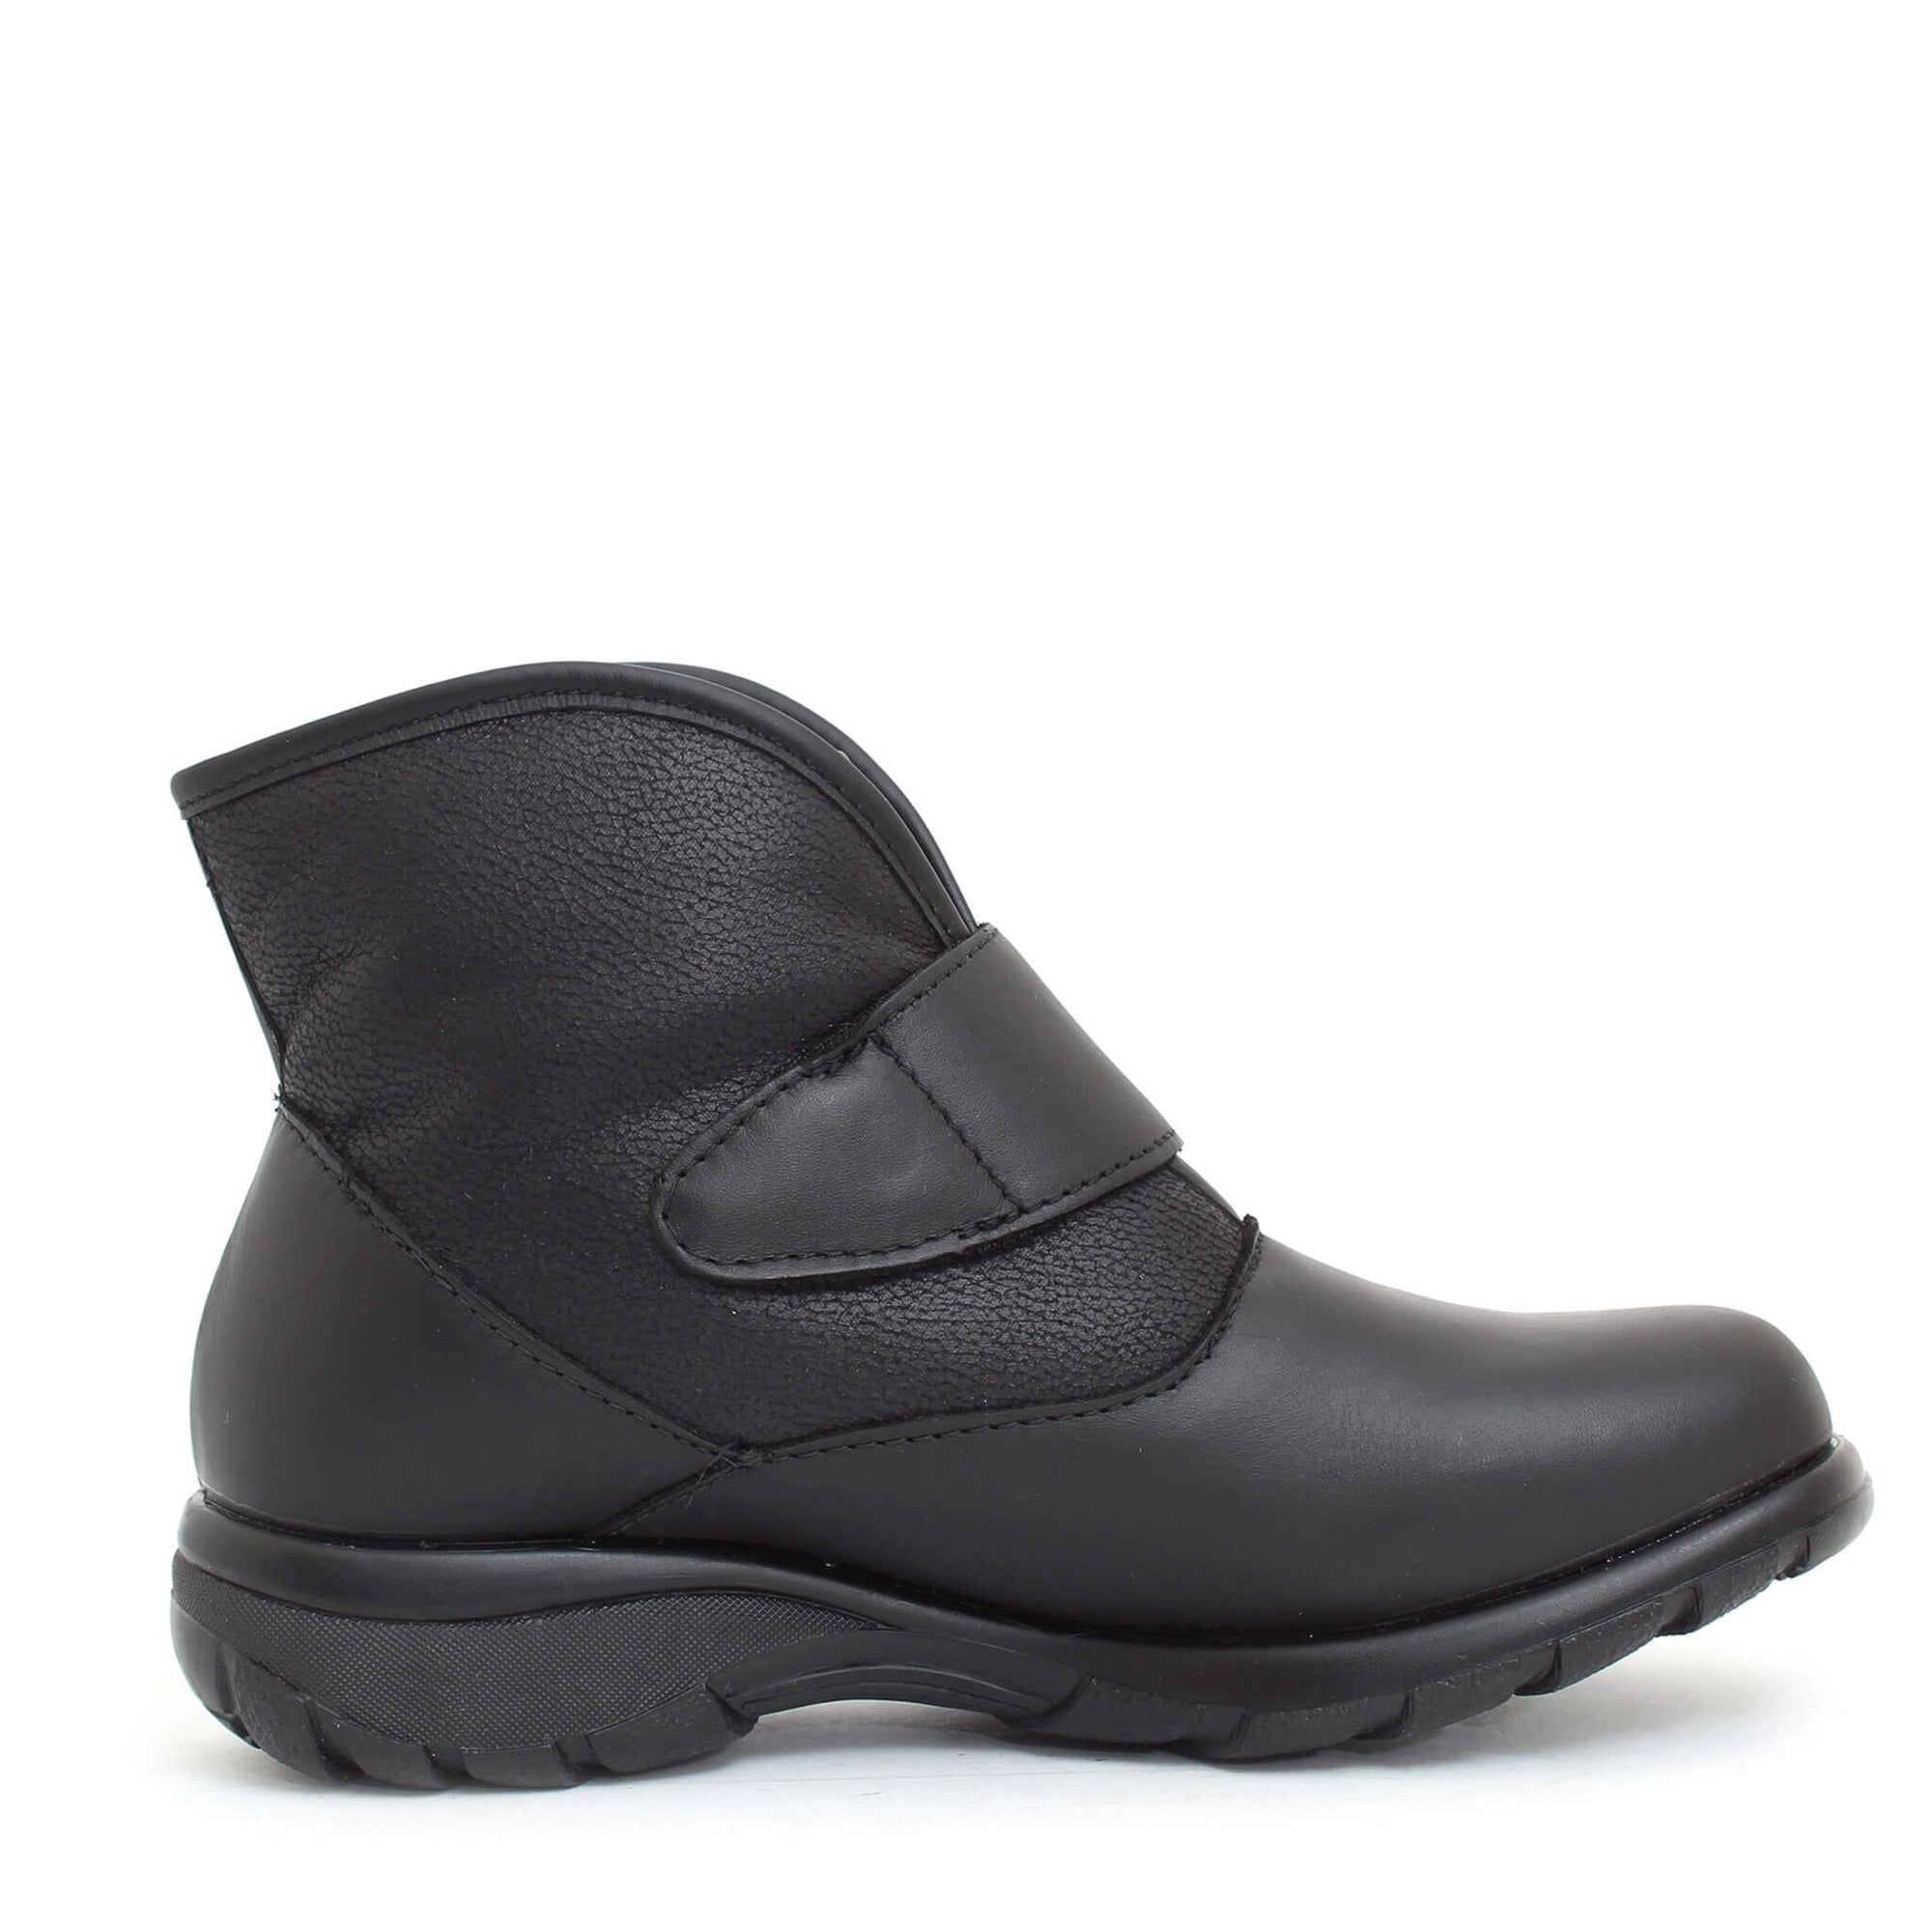 Secure winter boot for women - Black